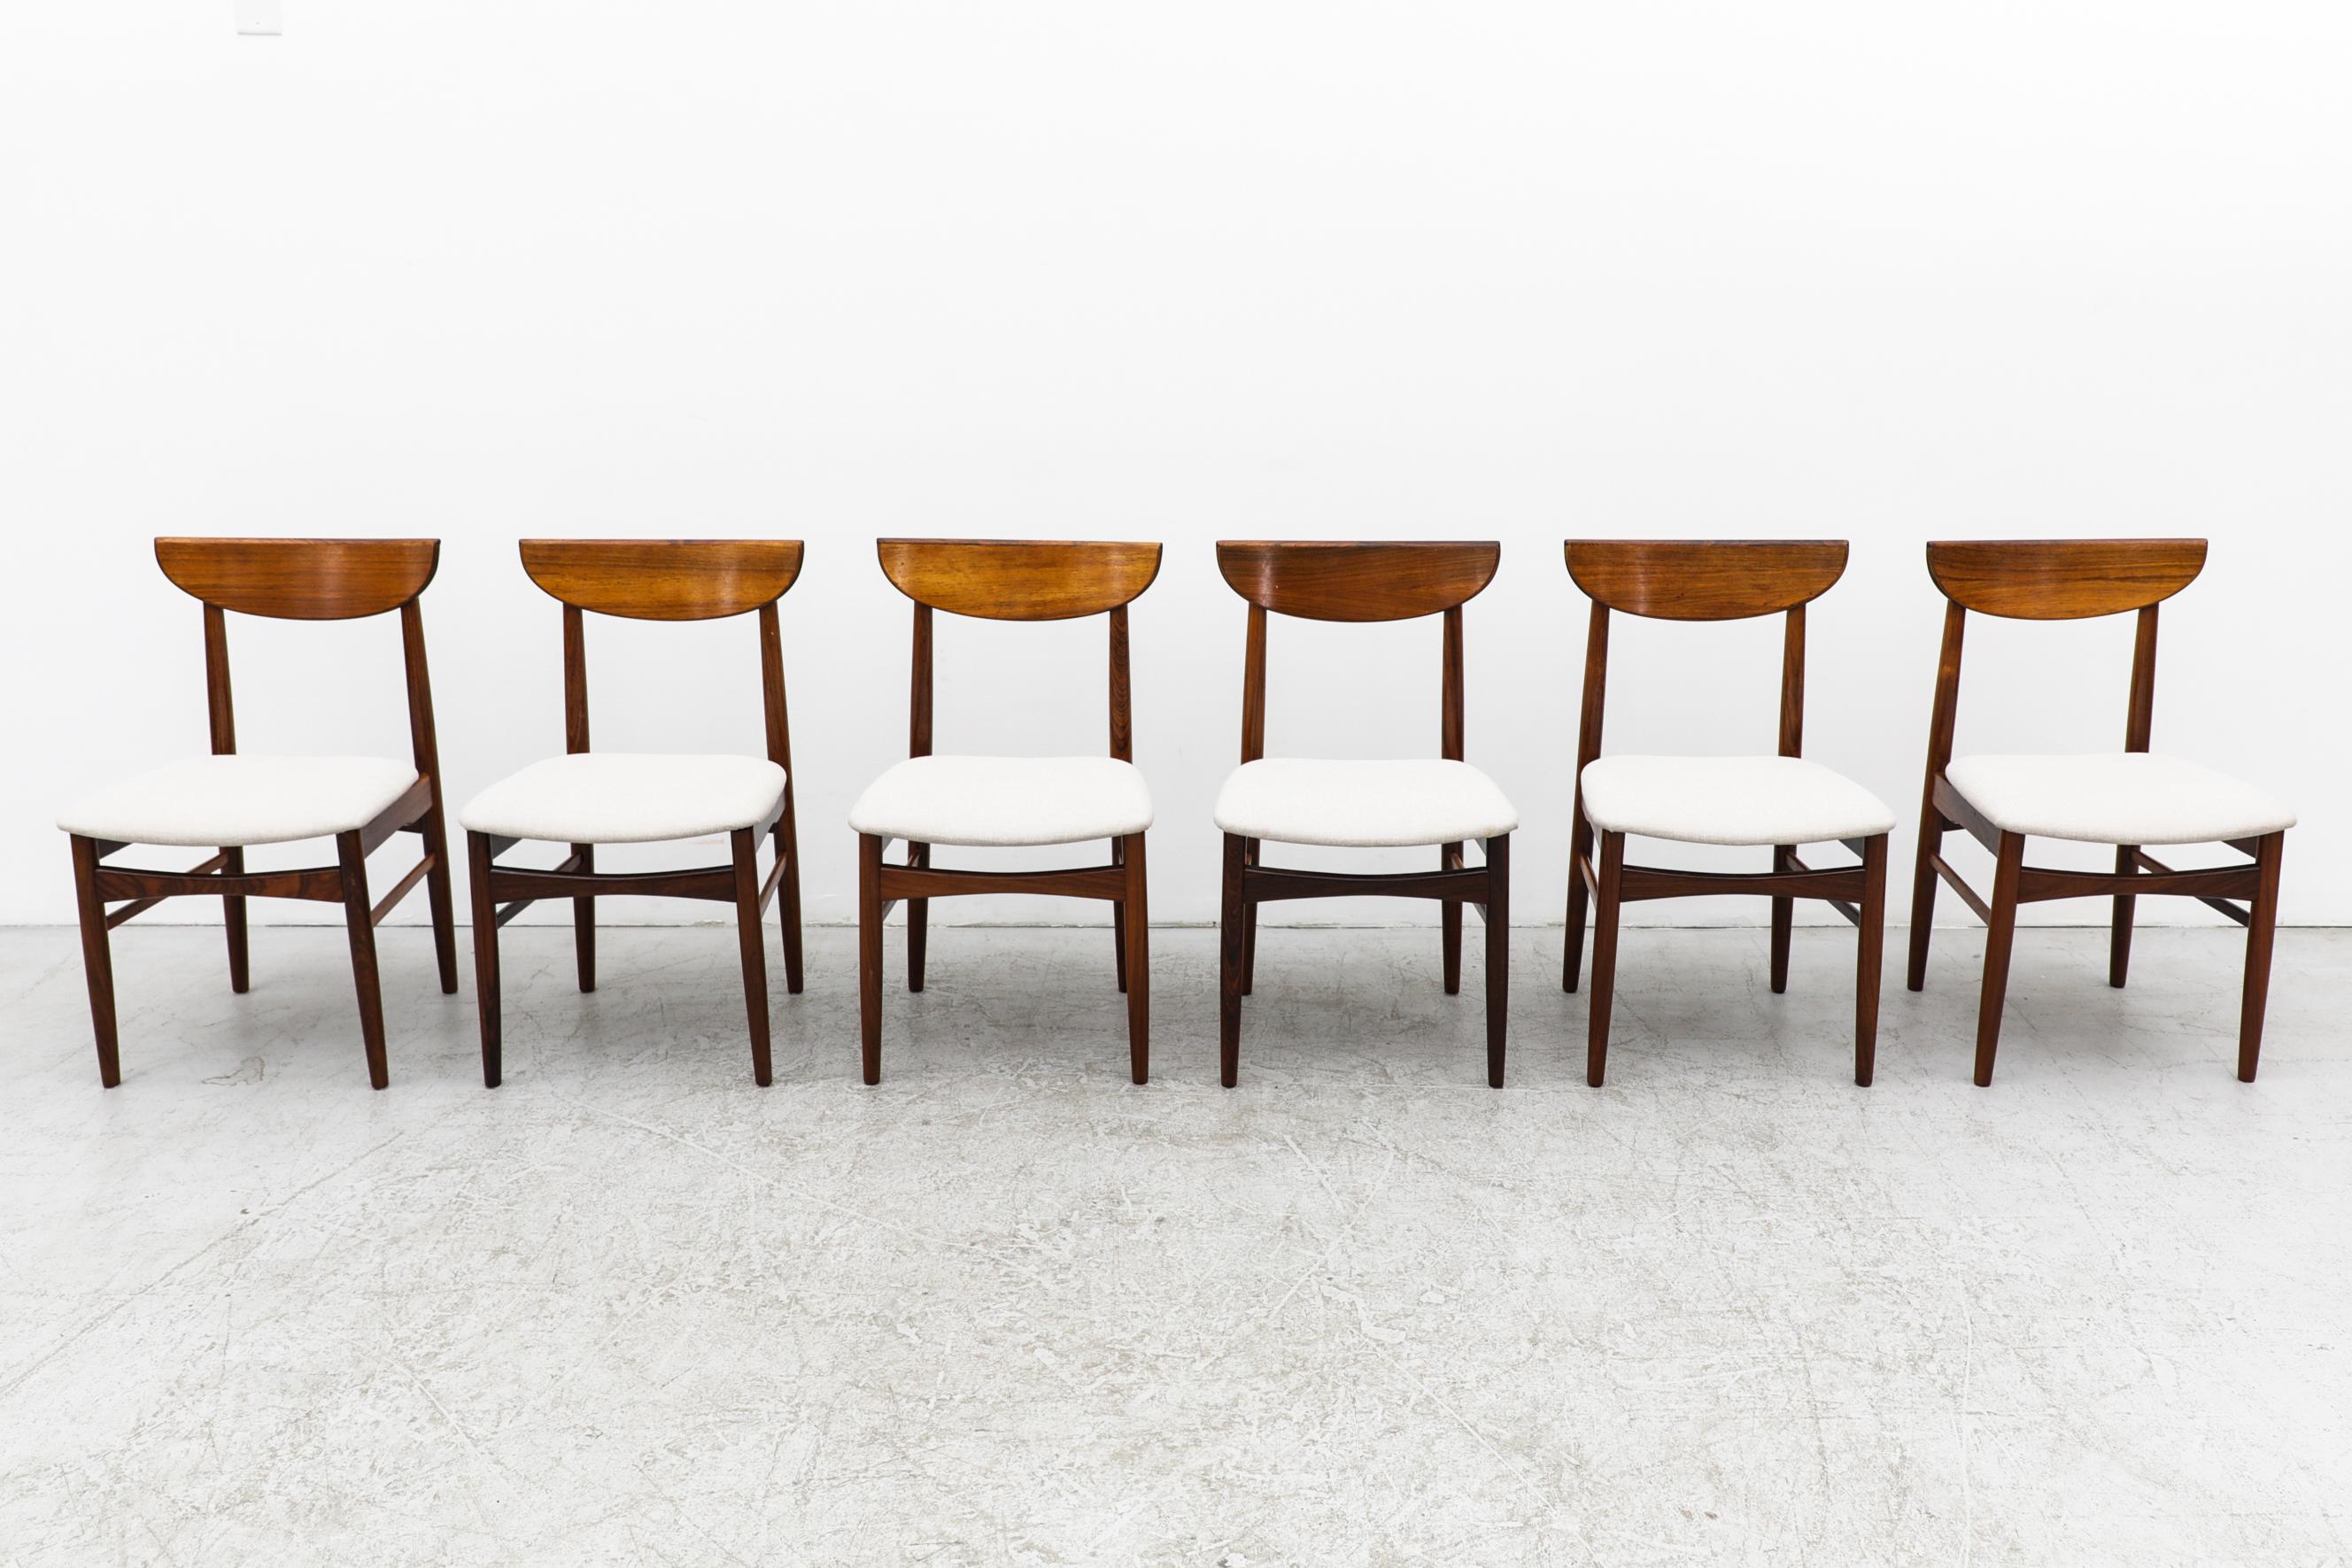 Set of 6 rosewood dining chairs with half moon shaped backrests and newer bone white upholstered seats. Designed by Danish designer Kurt Østervig. In original condition with a few visible scratches on the frames. Wear is consistent with their age